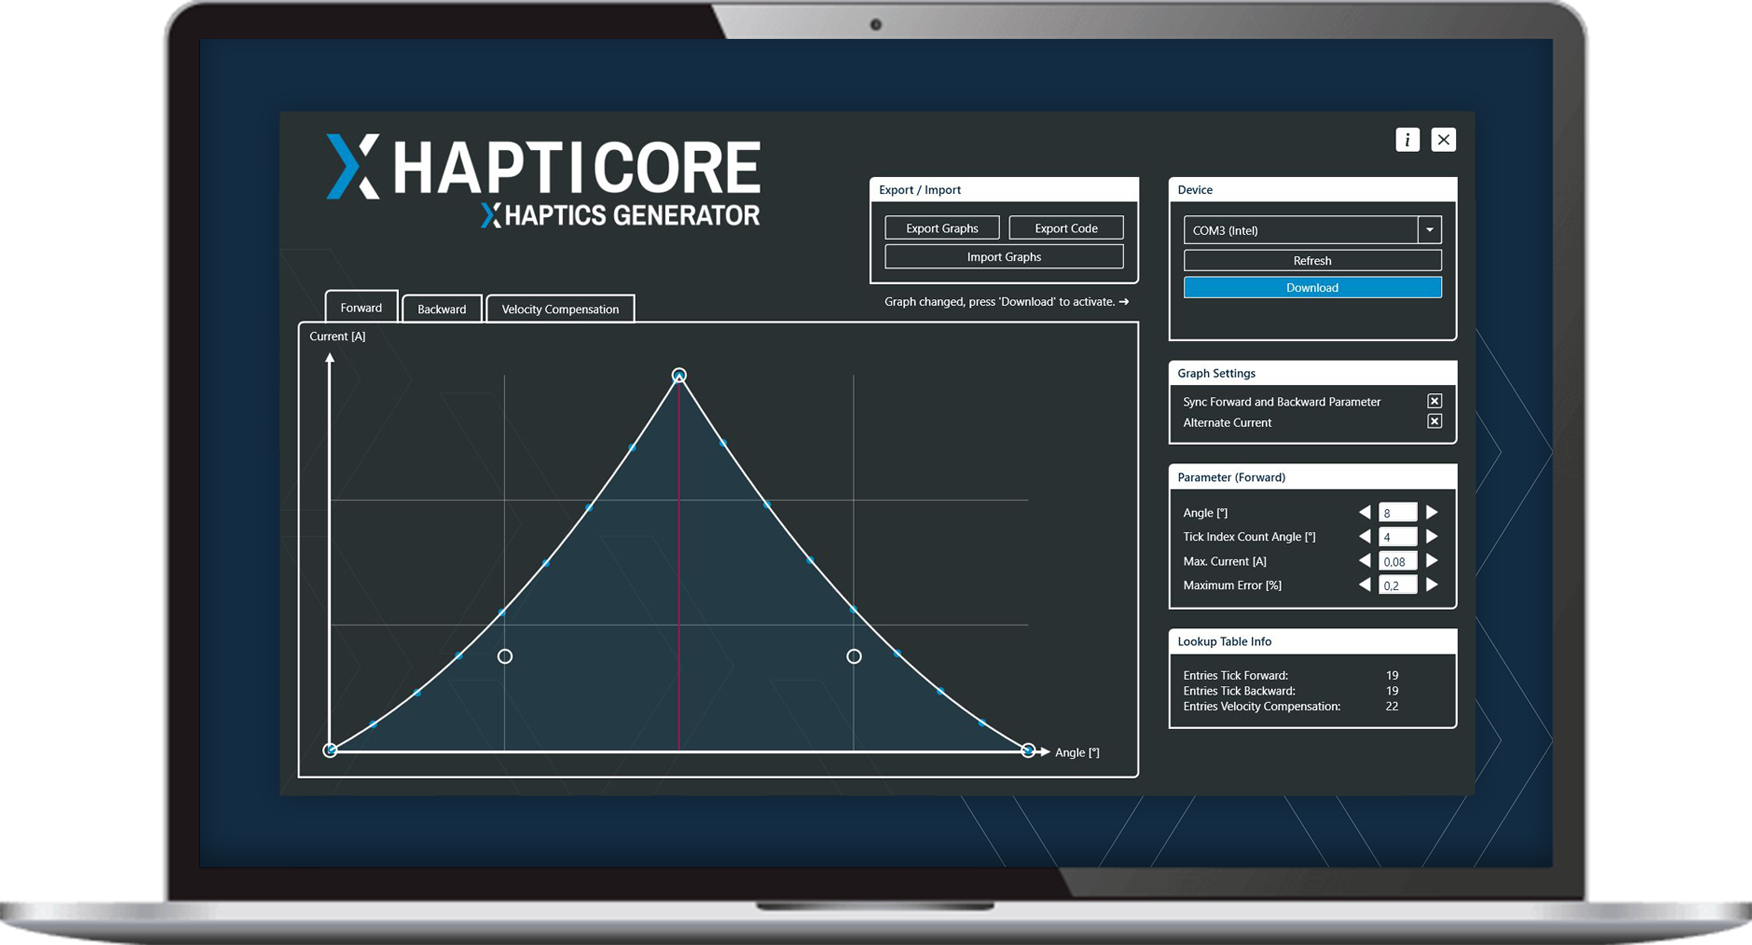 Illustration of a notebook running the HAPTICORE Haptics Generator software, which graphically displays haptic feedback and allows the user to customize tactile feedback by moving points.